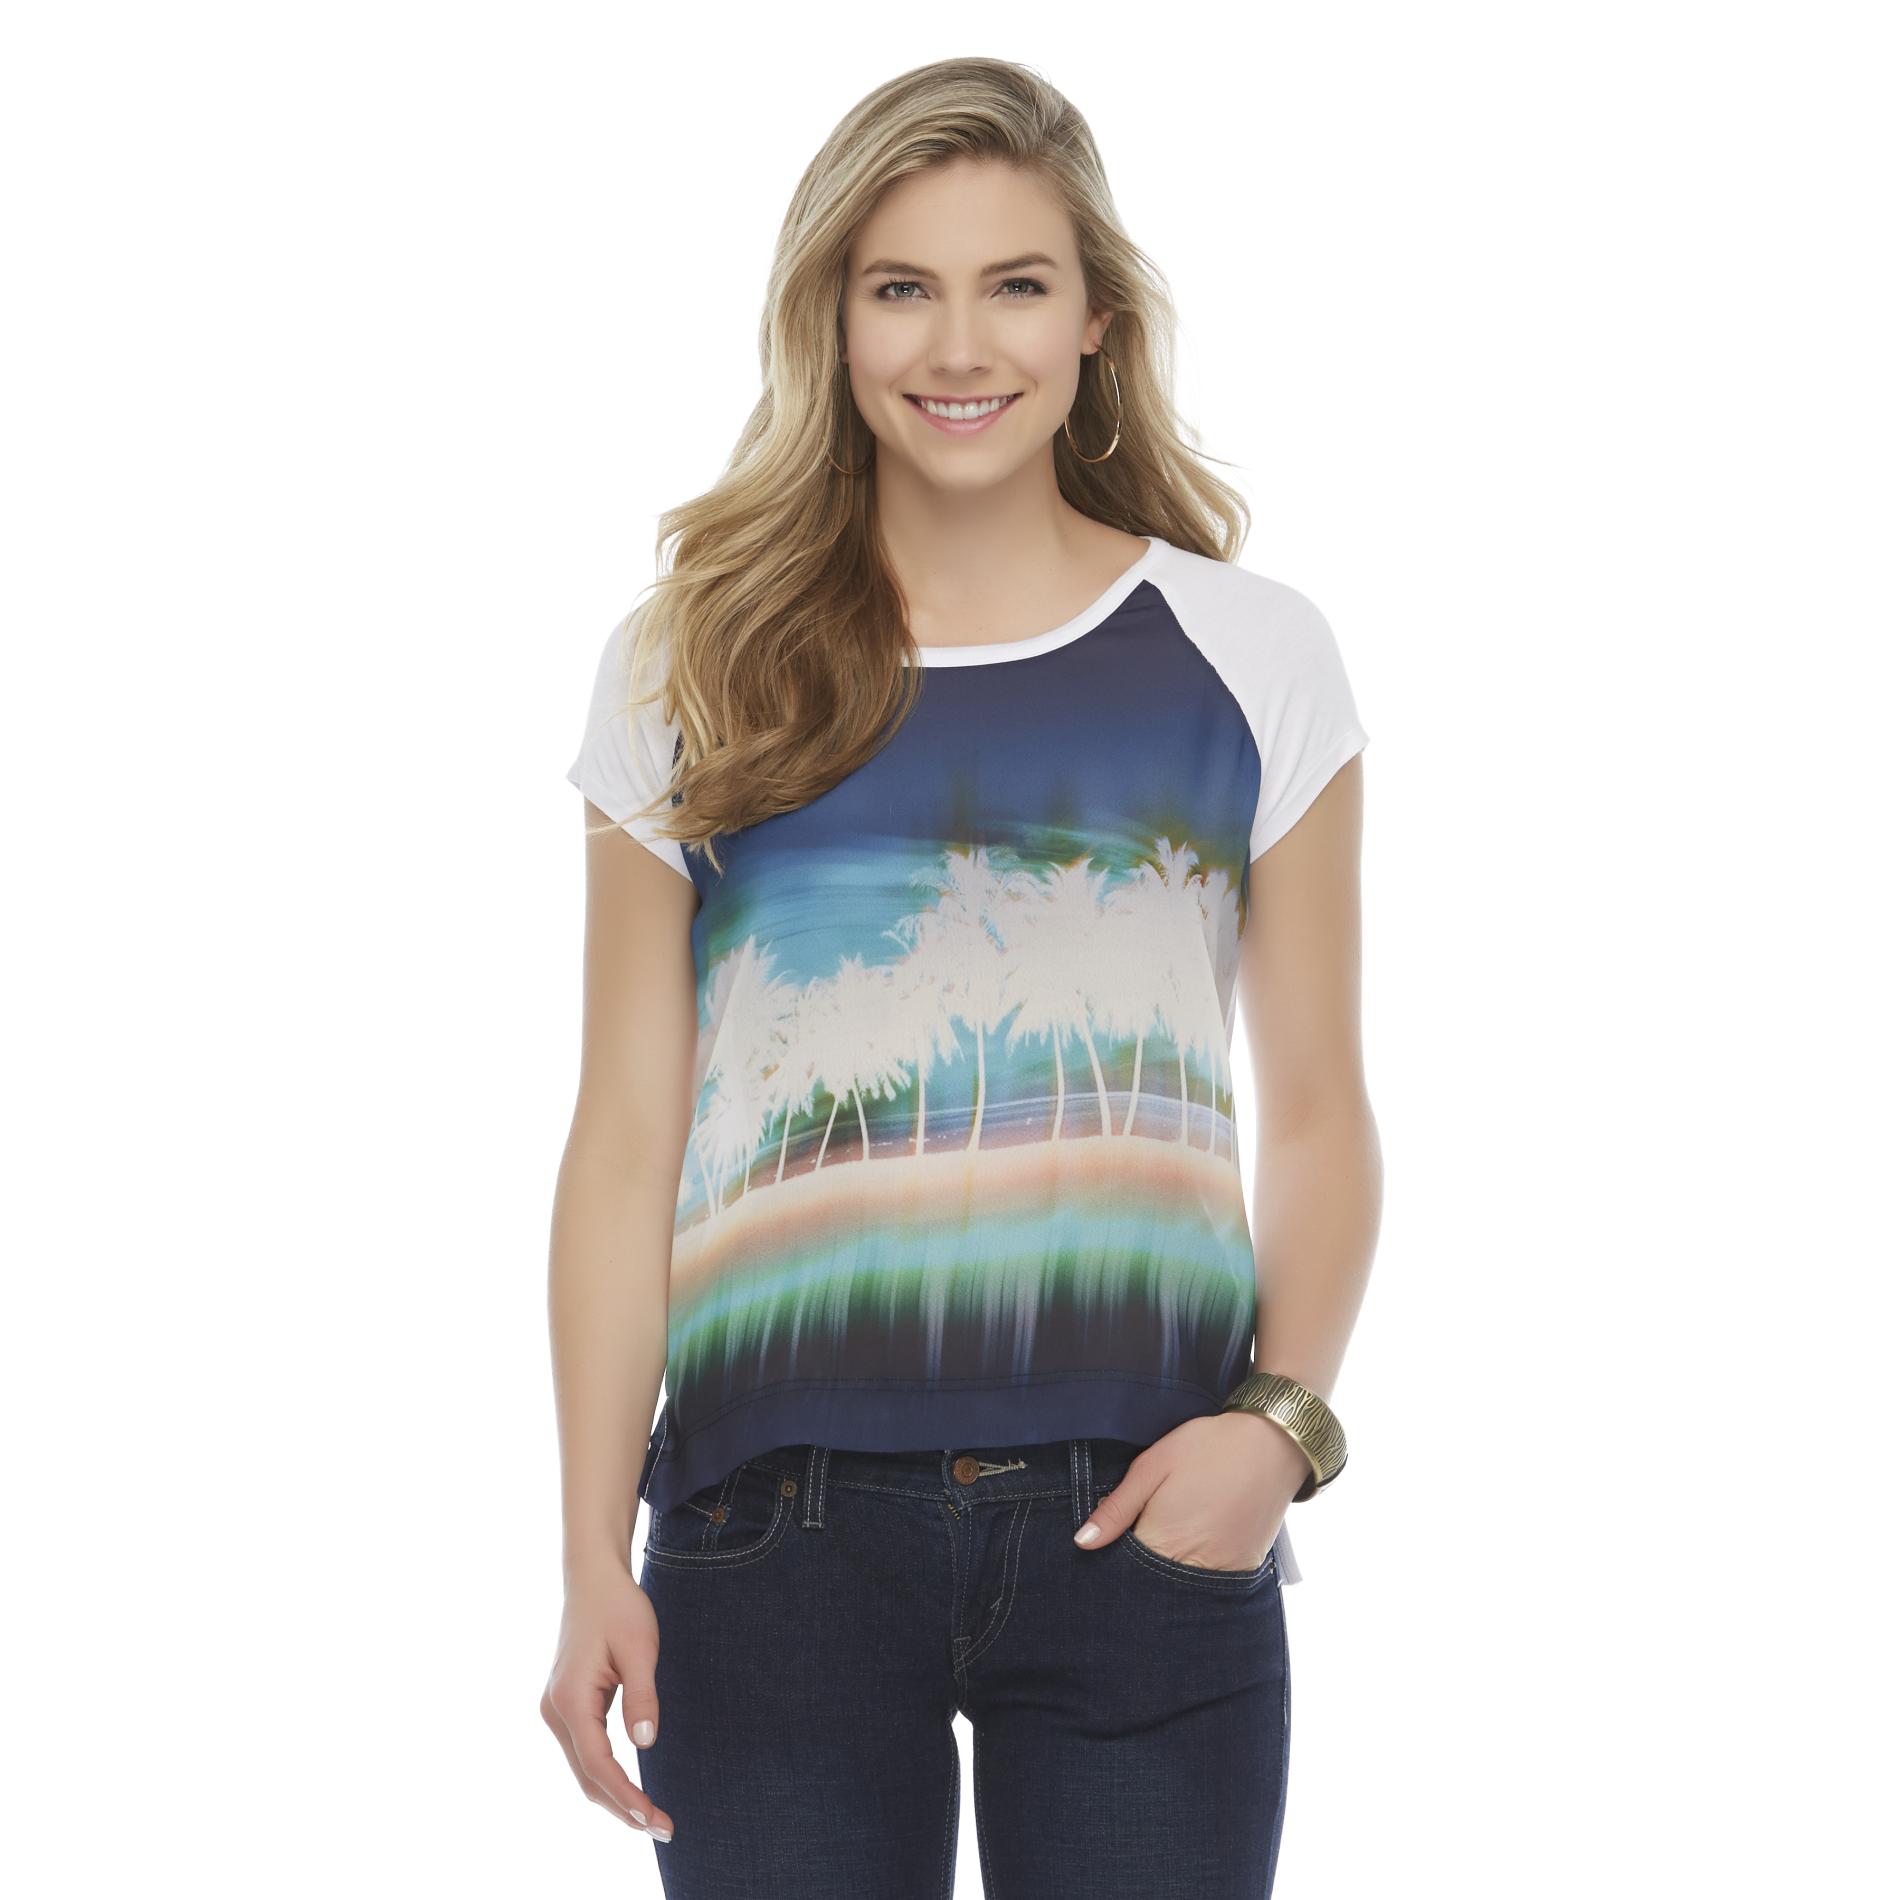 Attention Women's Mixed-Media T-Shirt - Palm Trees